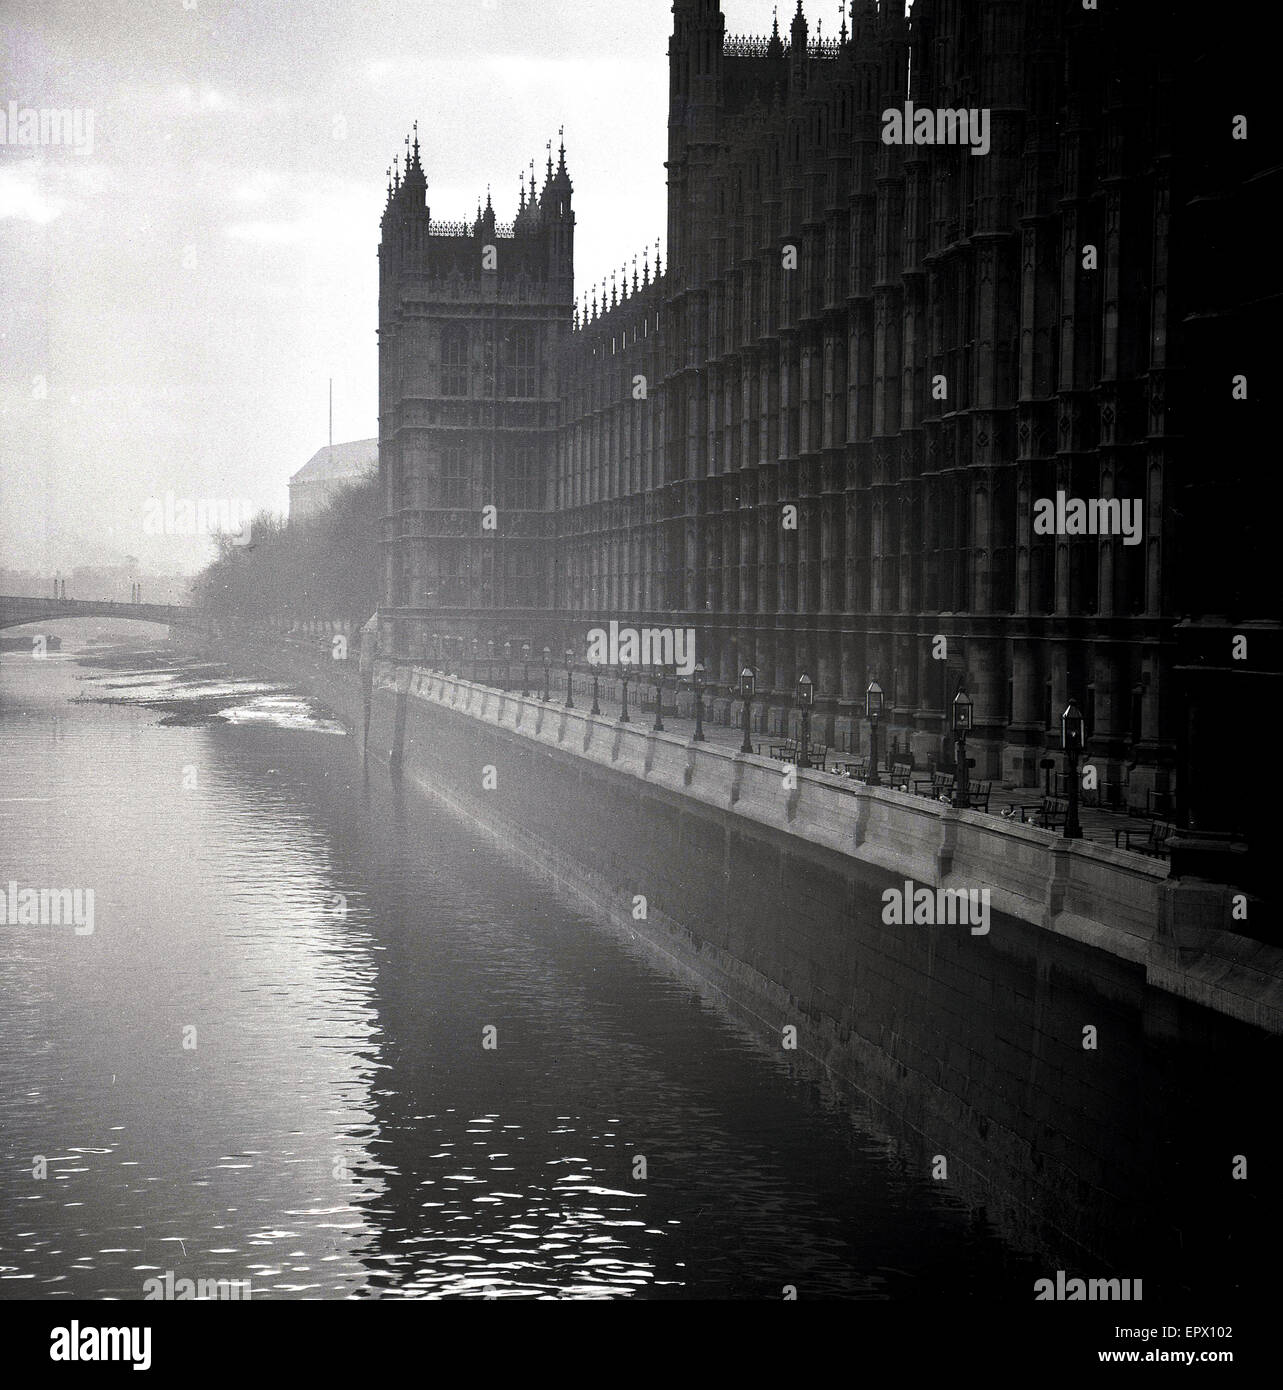 1950s, historical, misty morning, exterior view of the Palace of Westminster or the Houses of Parliament, on the Middlesex bank of the River Thames, City of Westminster, London, England. Stock Photo